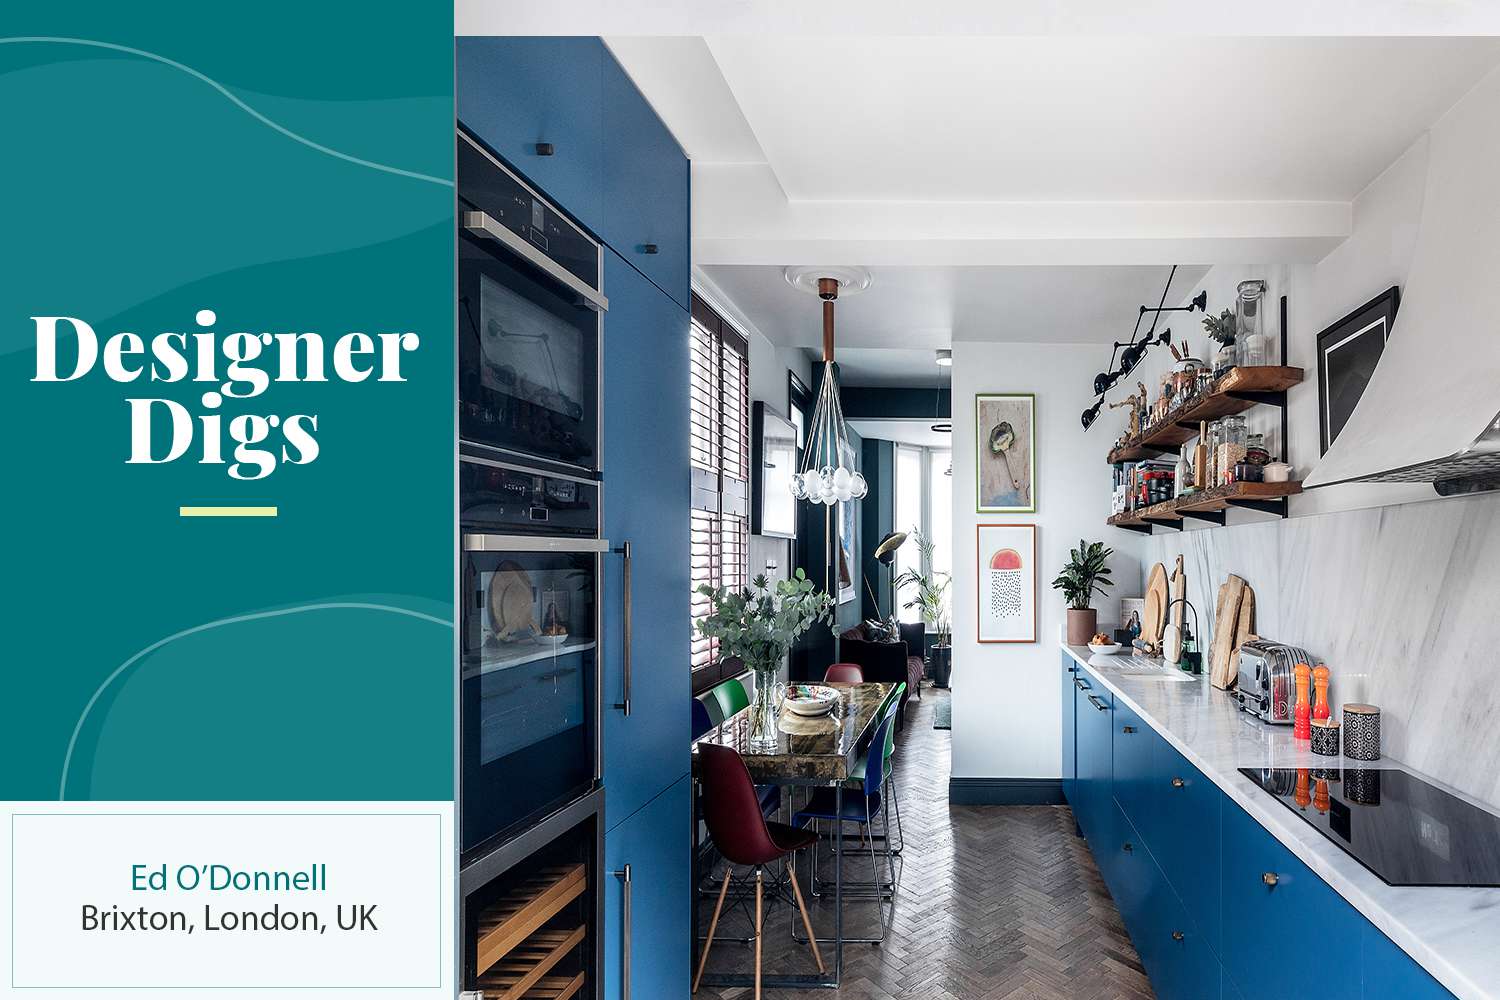 The Brixton, London home of interior designer Ed O'Donnell